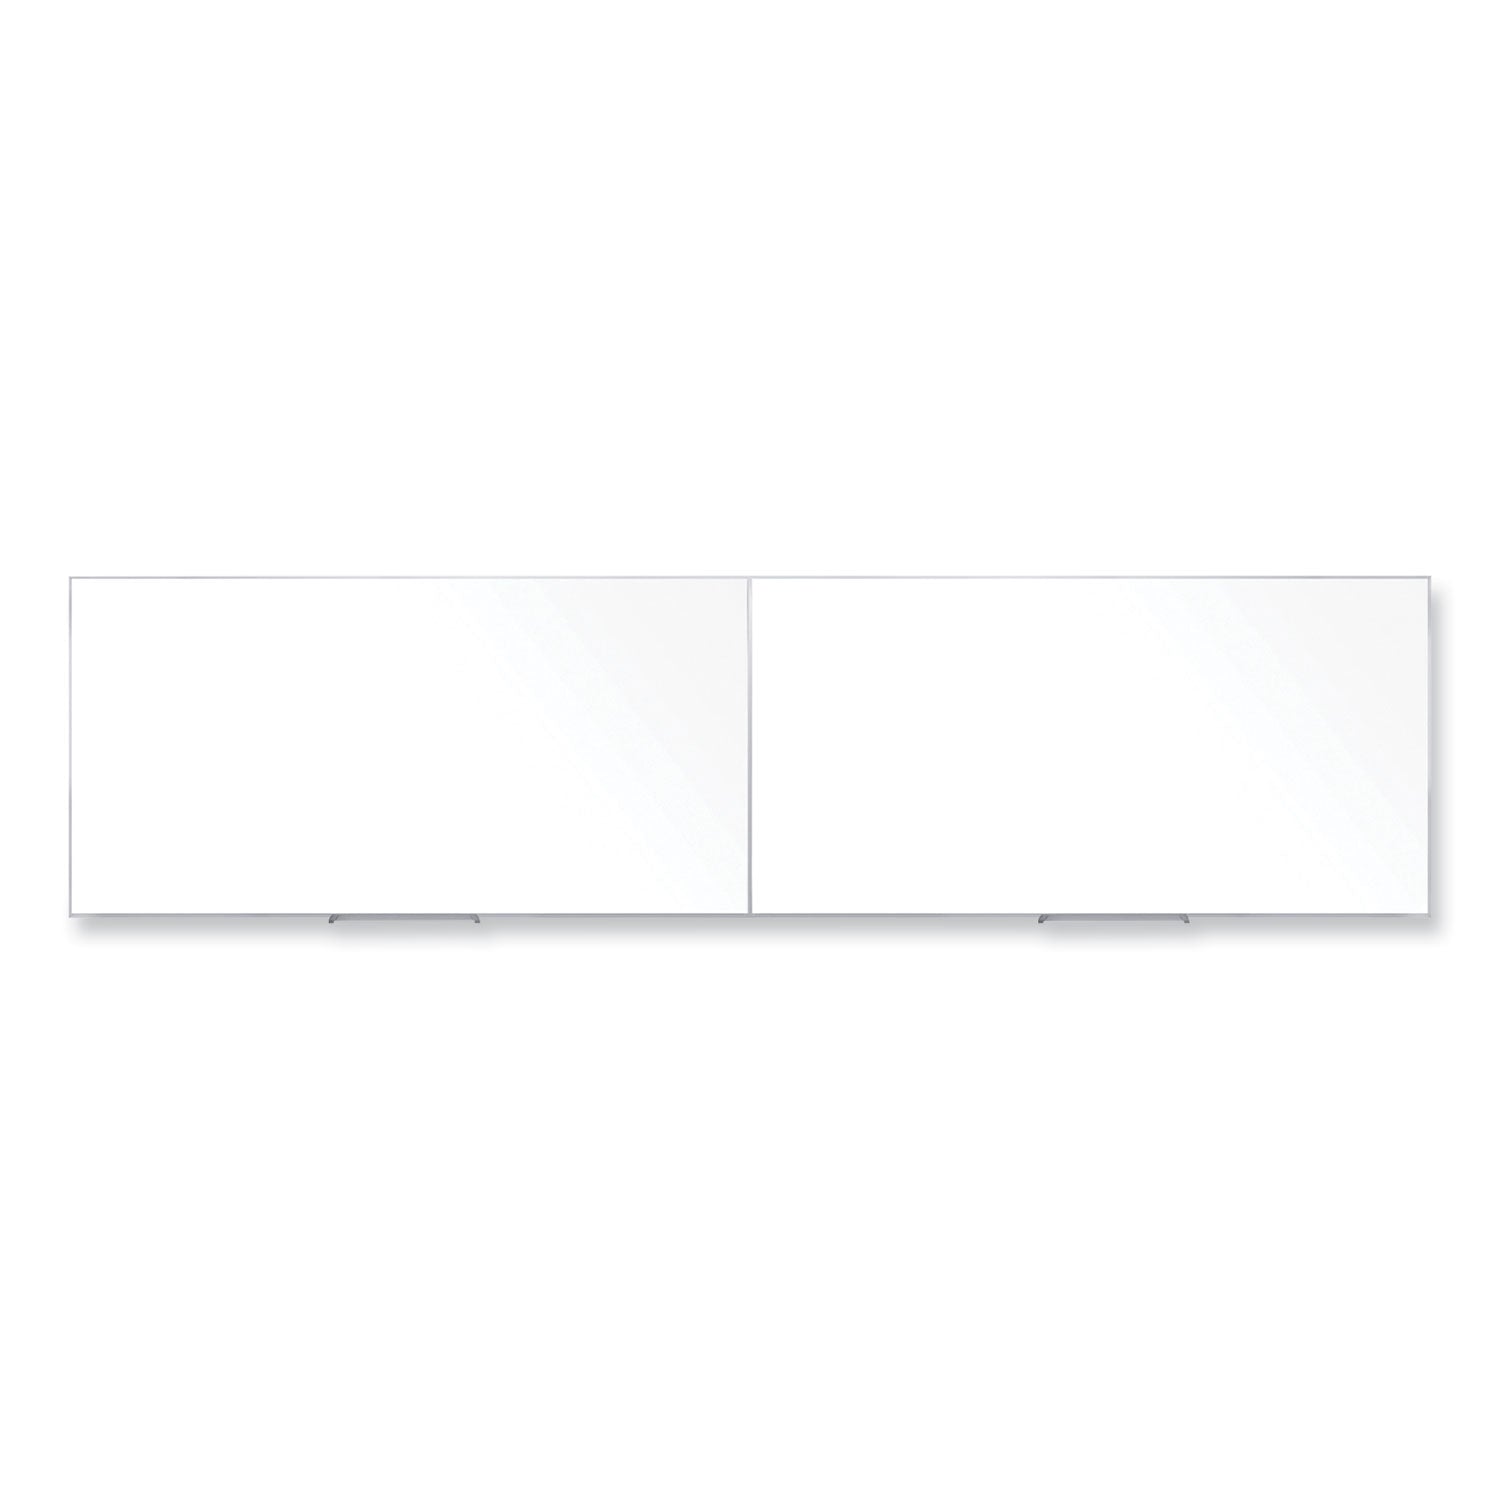 magnetic-porcelain-whiteboard-with-satin-aluminum-frame-193-x-485-white-surface-ships-in-7-10-business-days_ghem14164 - 2